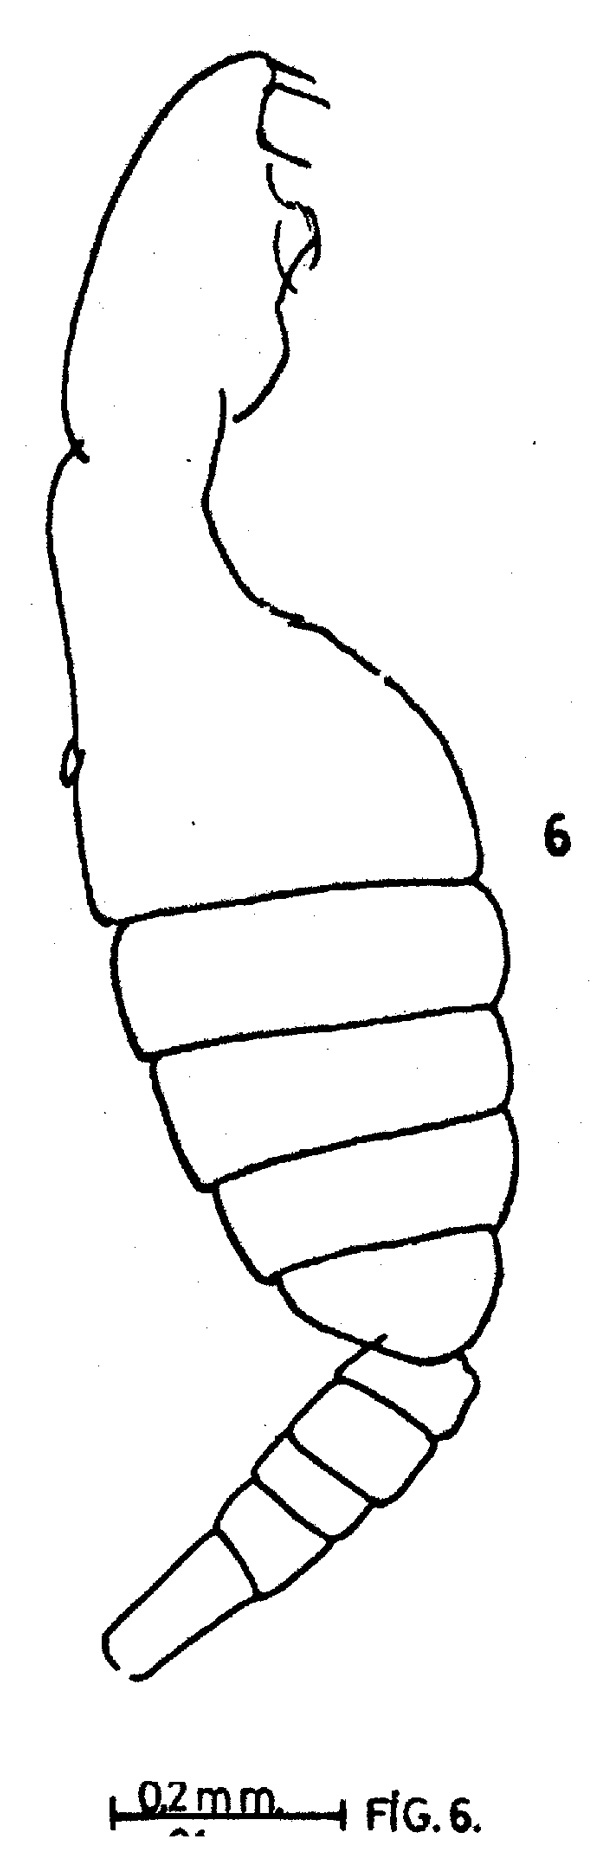 Species Centropages bradyi - Plate 5 of morphological figures